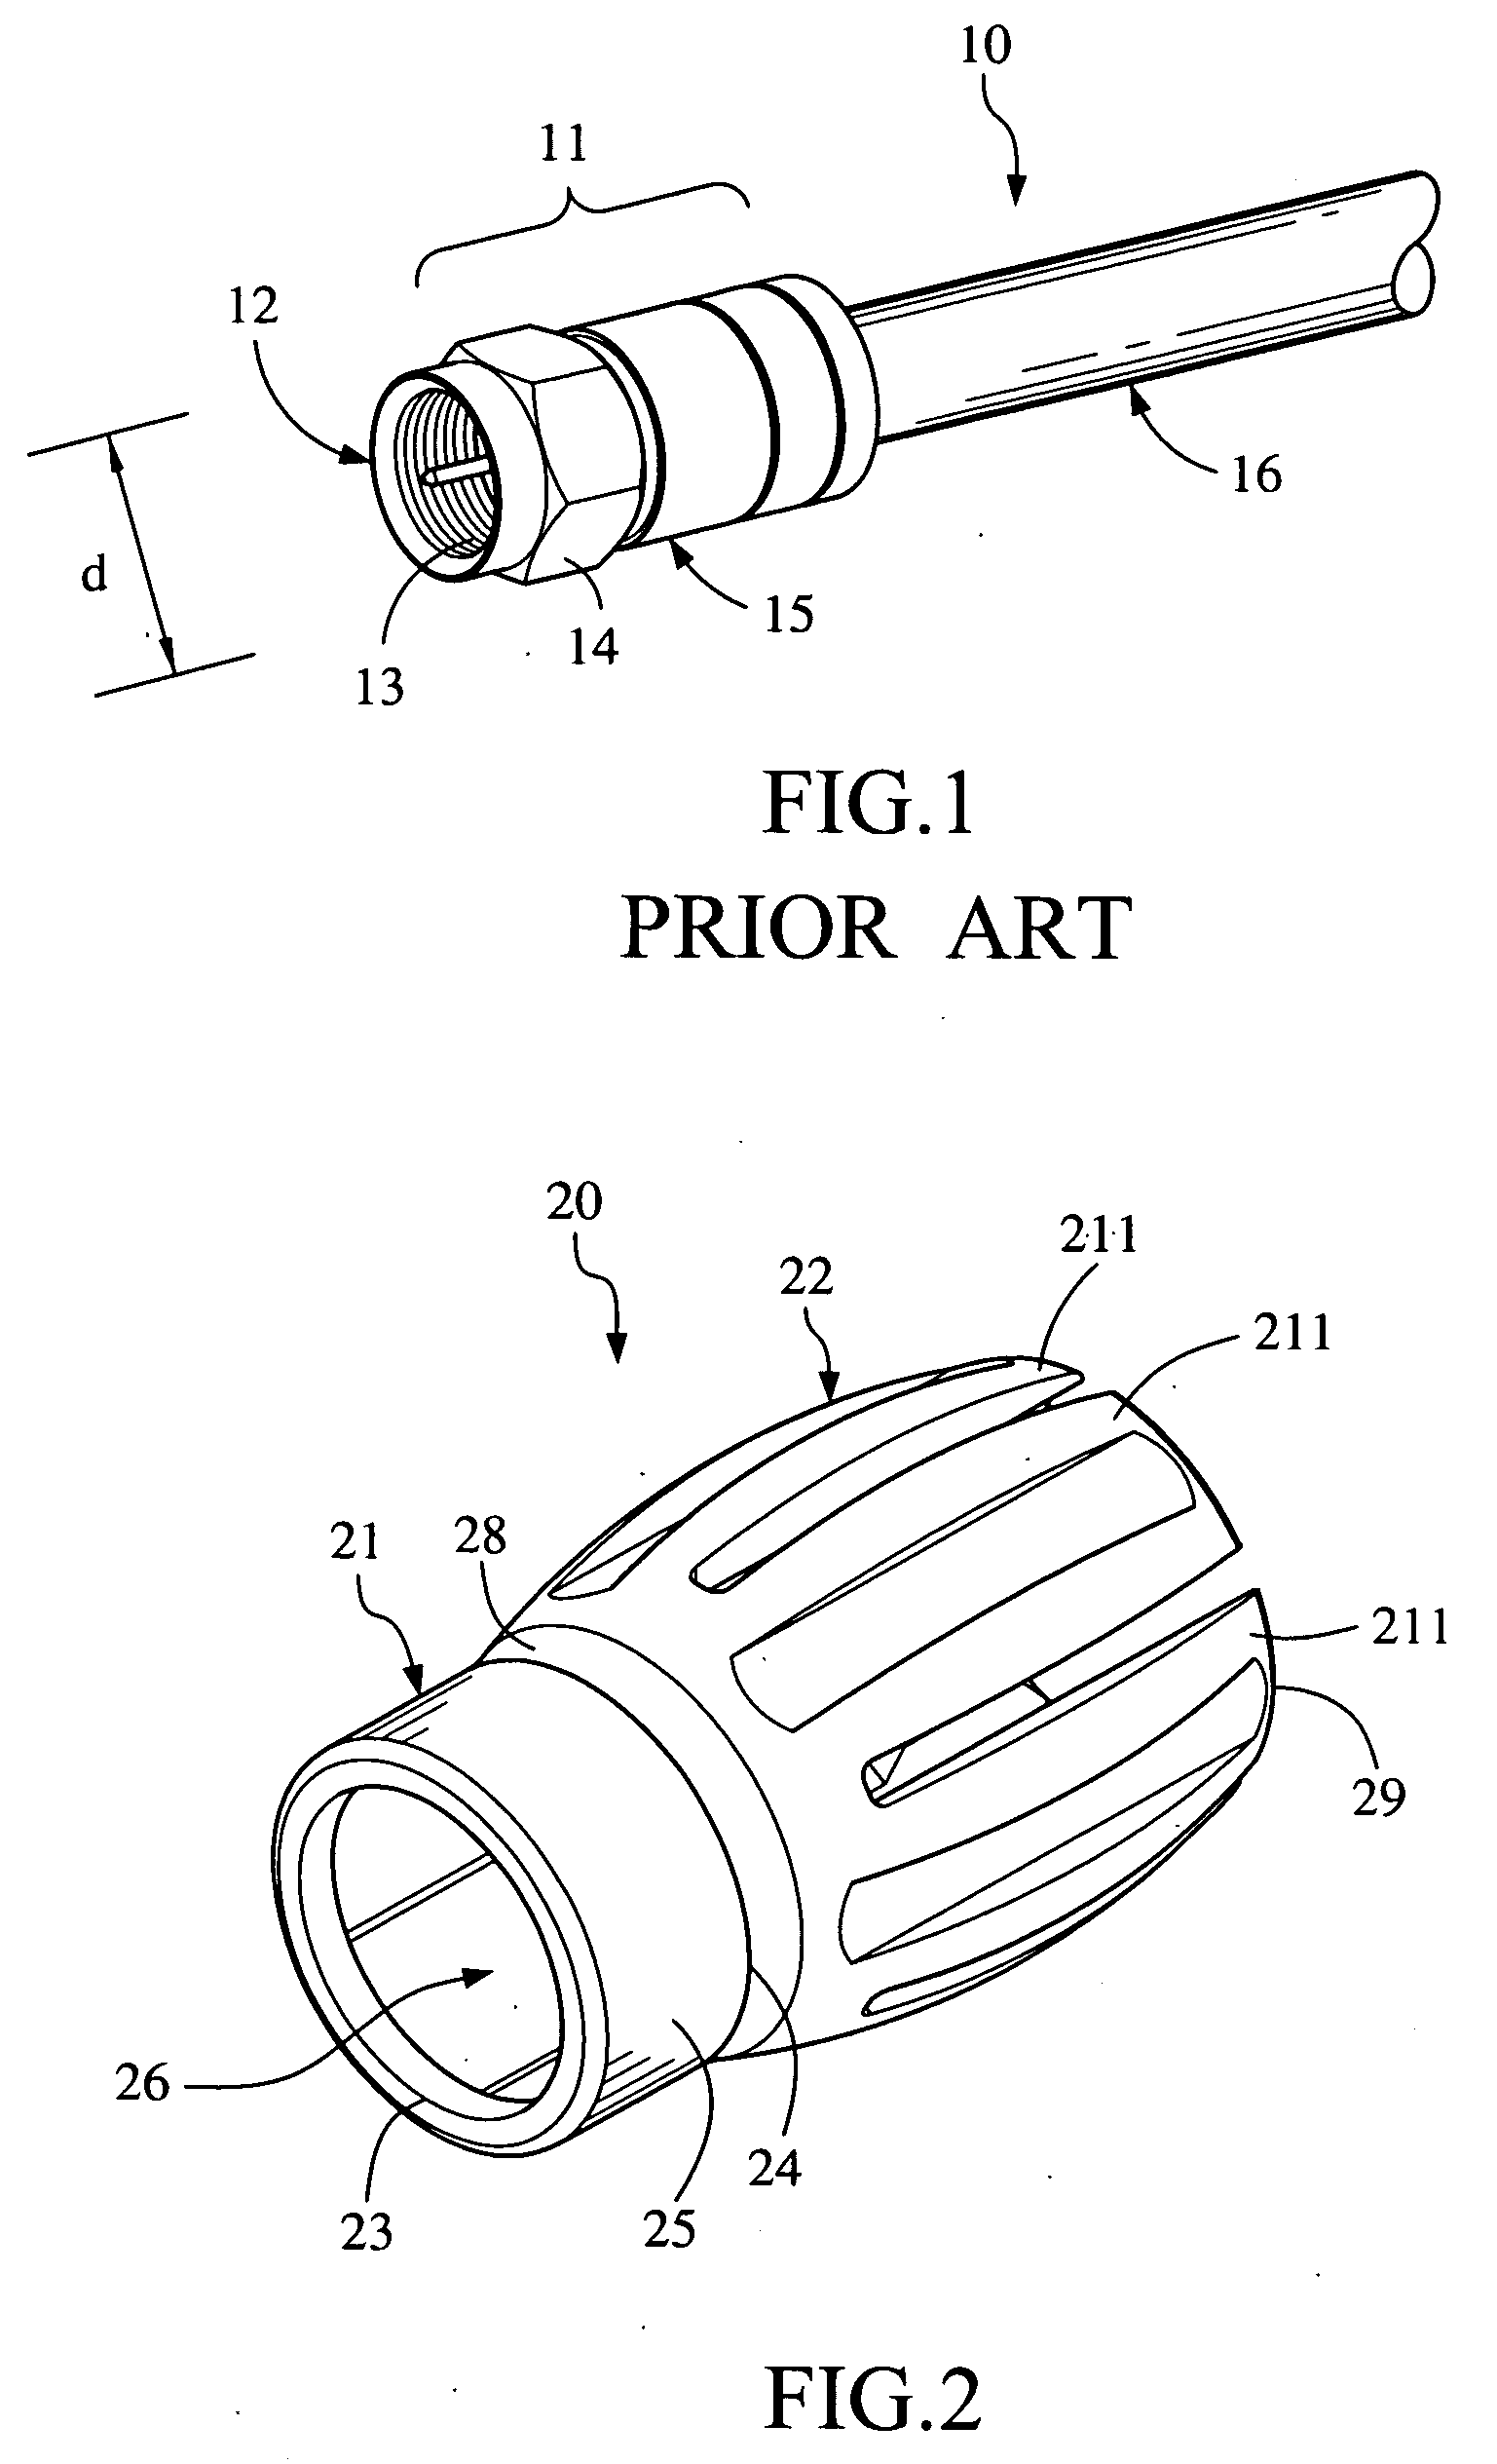 Jumper sleeve for connecting and disconnecting male f connector to and from female f connector